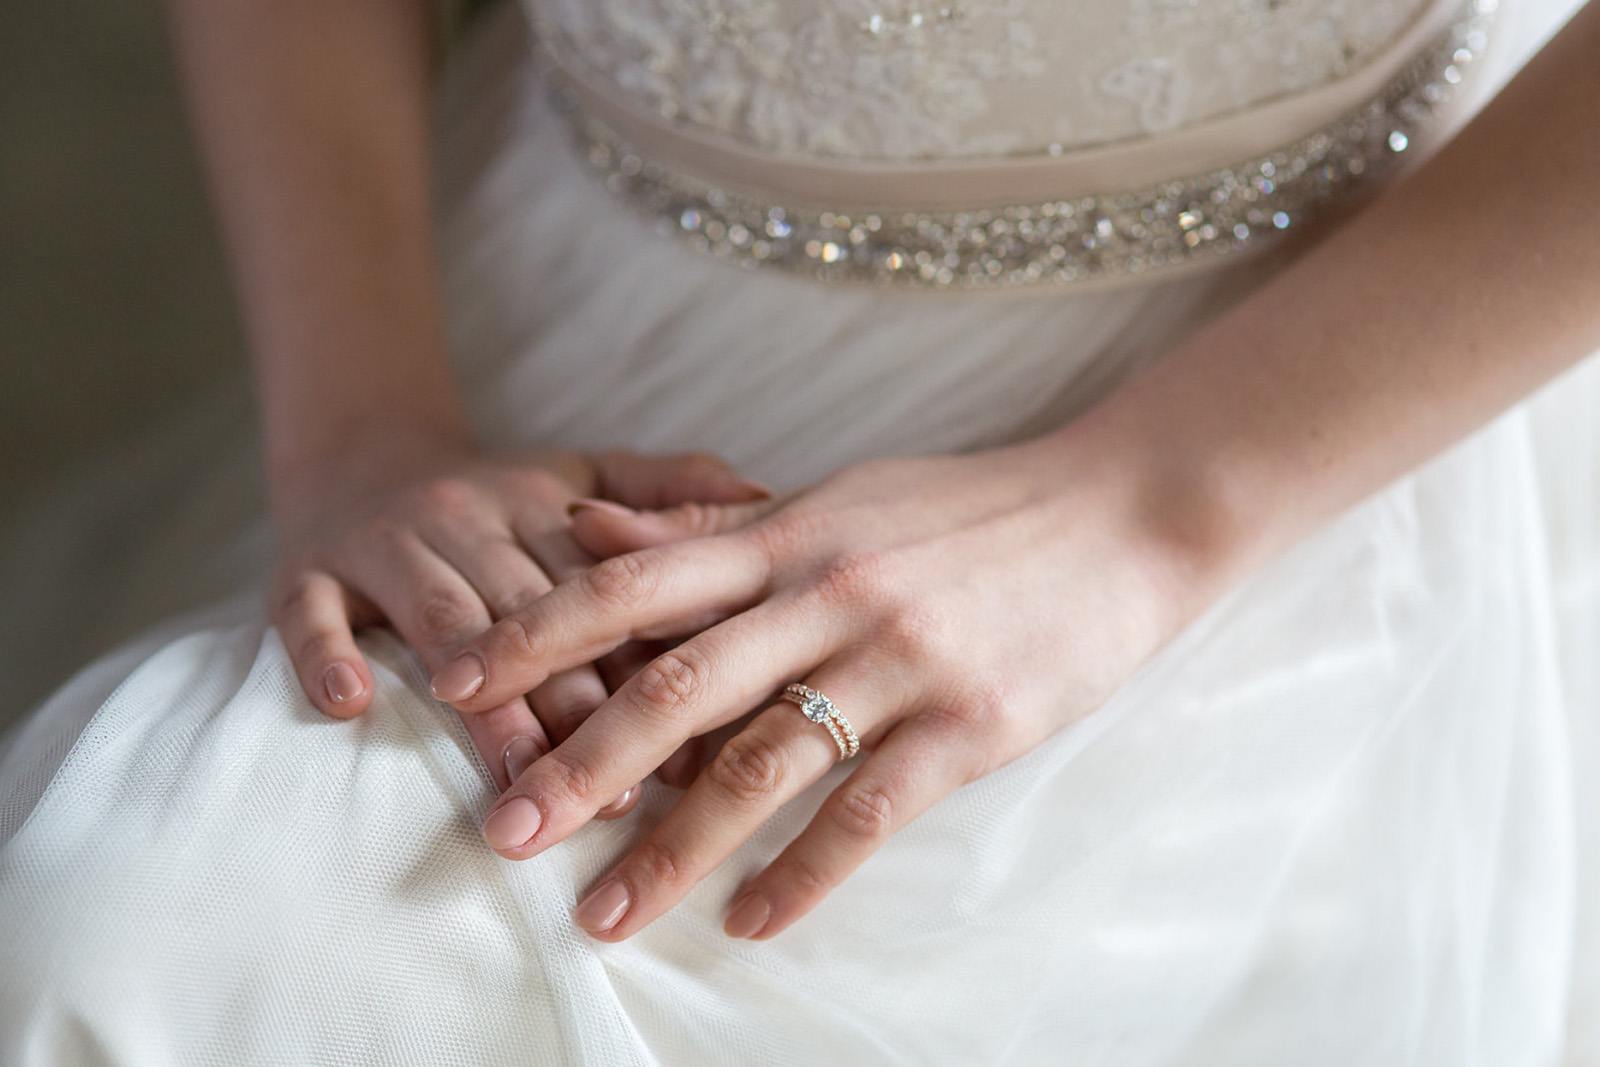 A woman wearing an engagement ring in a wedding dress